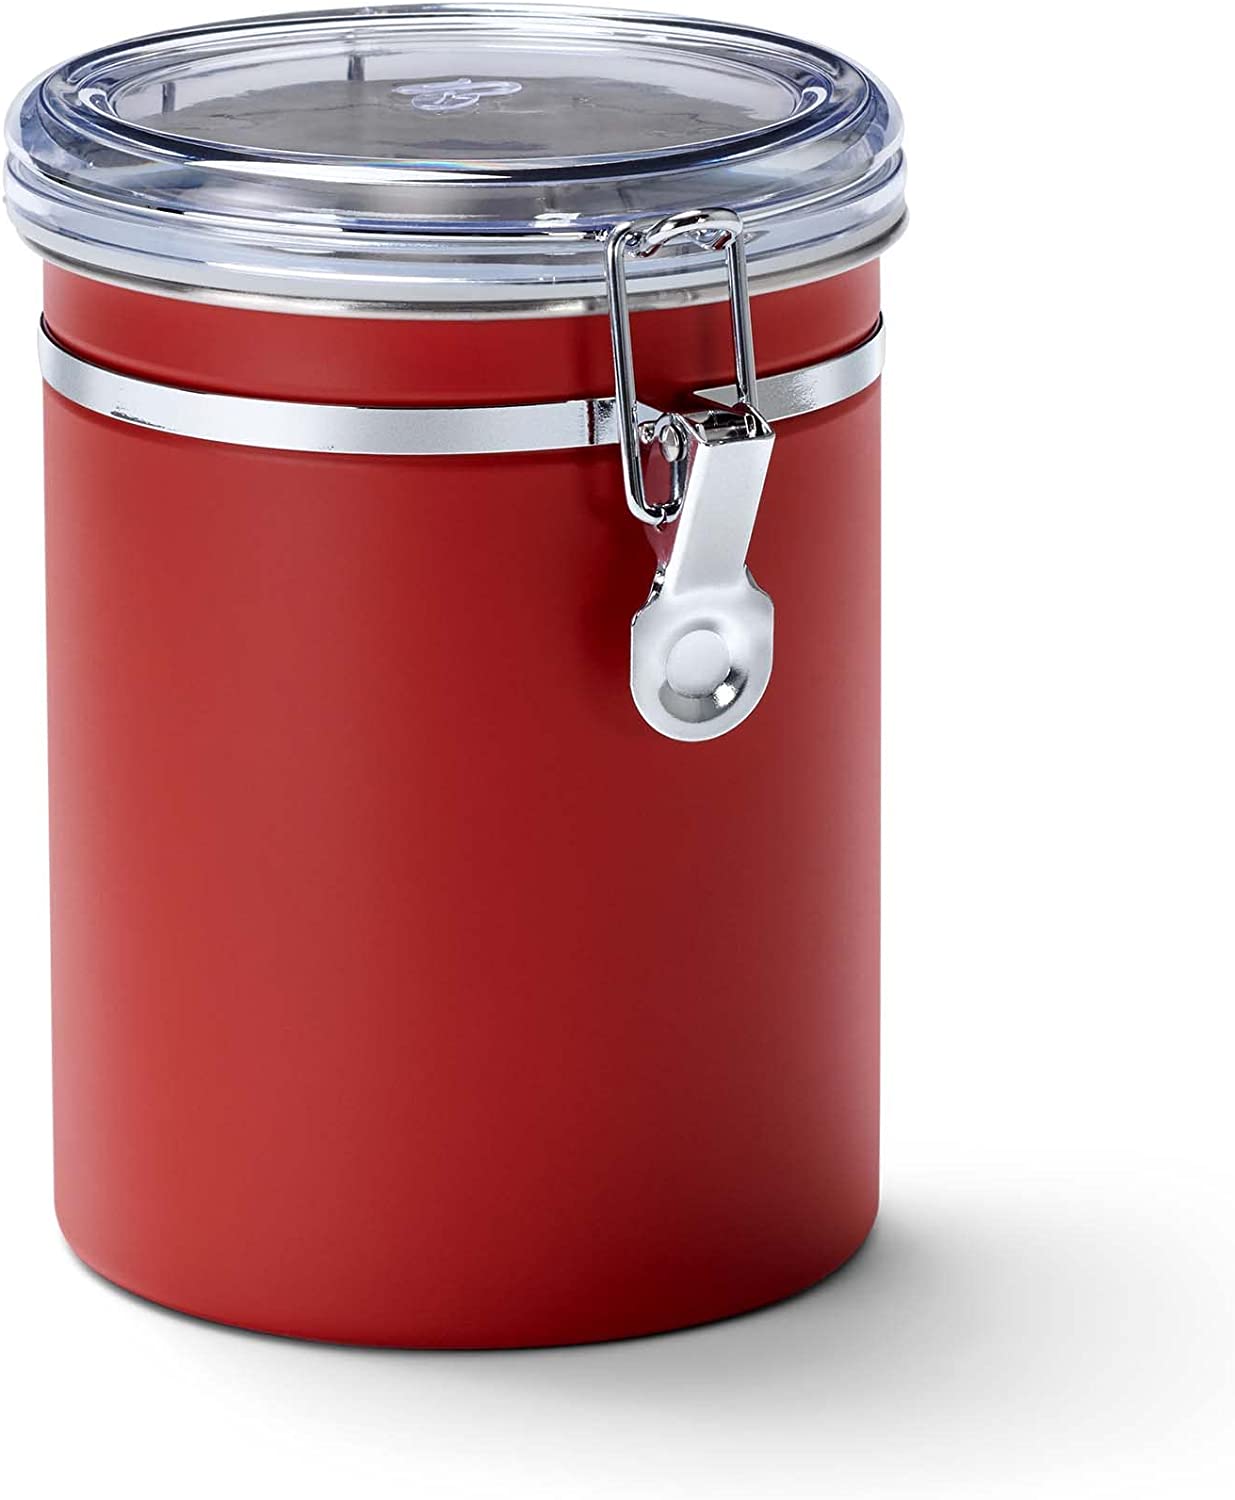 Tchibo Aroma Tin Coffee Canister, 500 g Filling Volume, Aroma-Proof, Stainless Steel, Red